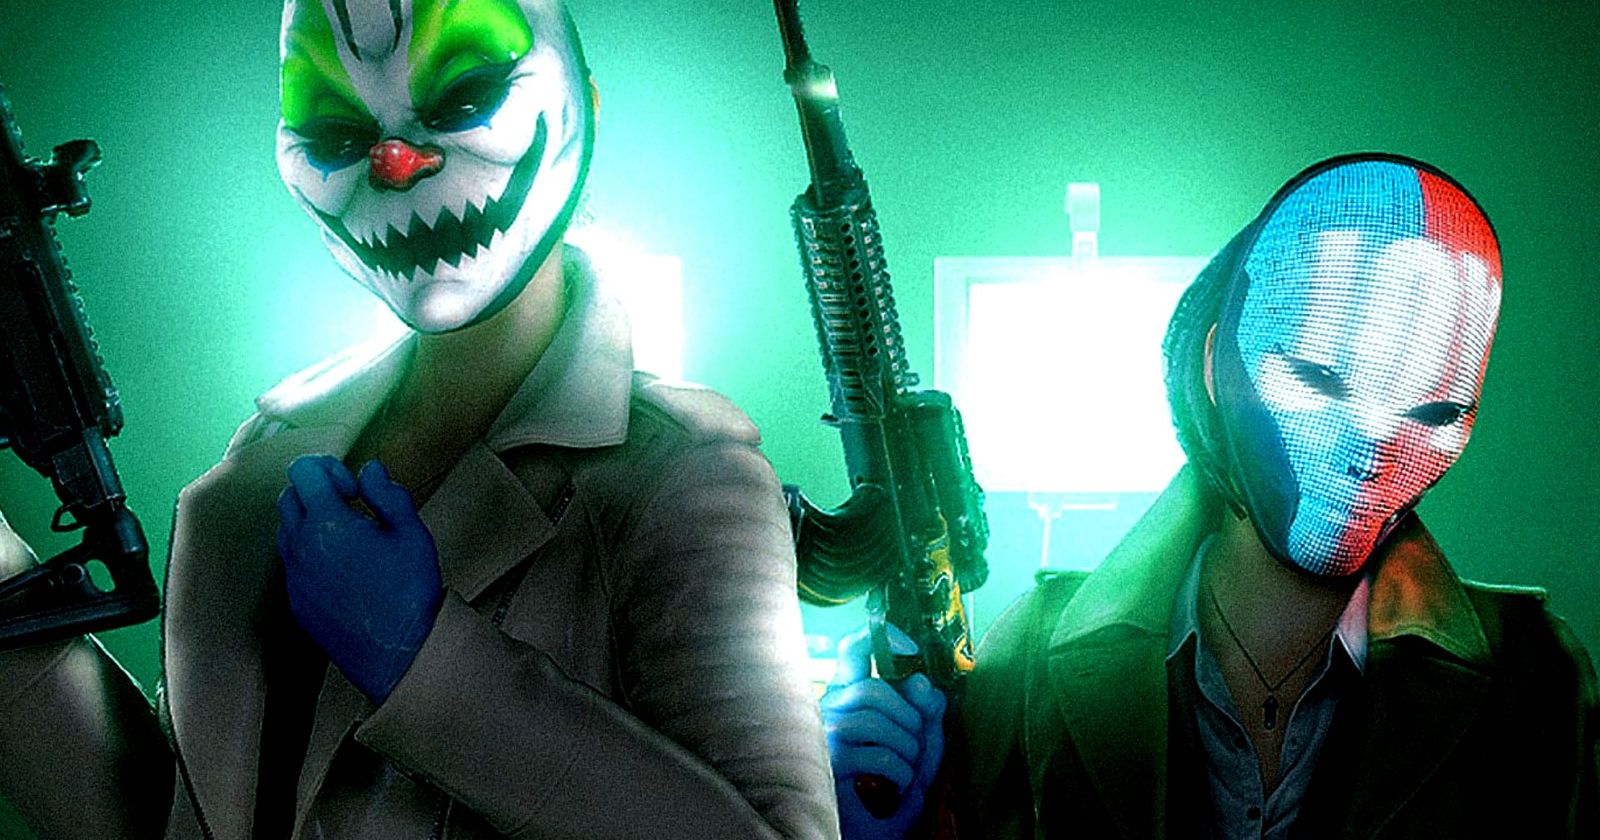 Will Payday 3 consider offline mode after launch issues and fan